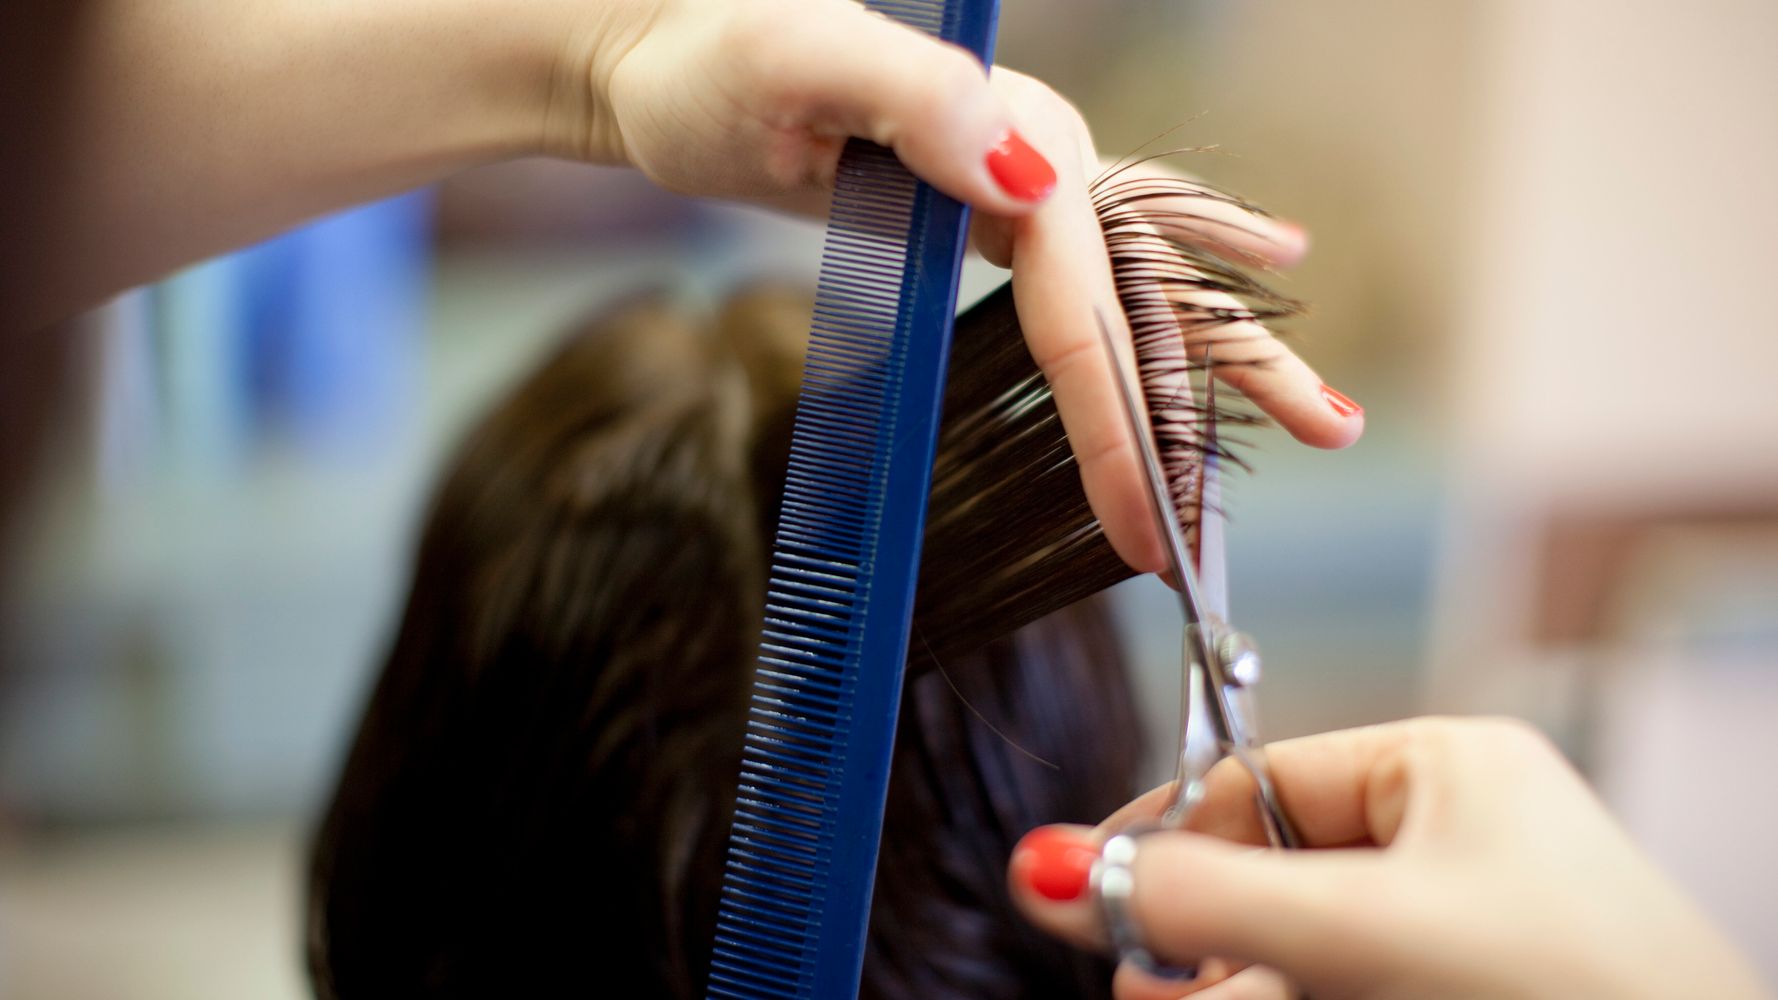 2 Missouri Hairstylists Potentially Exposed Over 100 Clients To Coronavirus - HuffPost